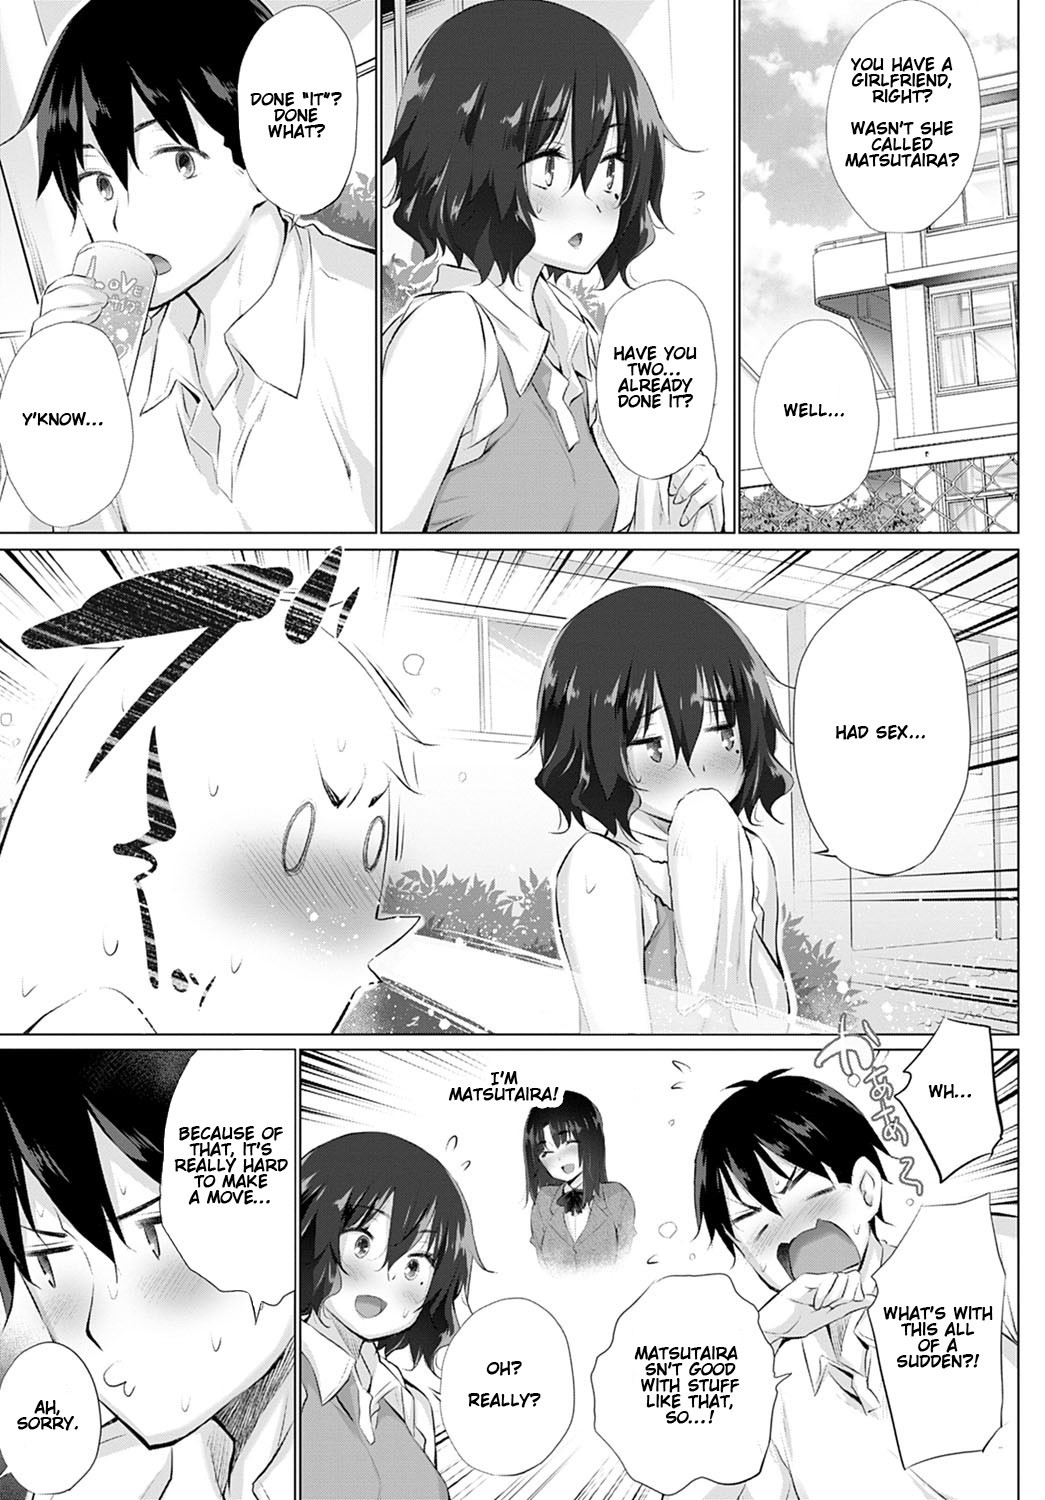 Hentai Manga Comic-What the Body and Heart Want Are Different #1-Read-3